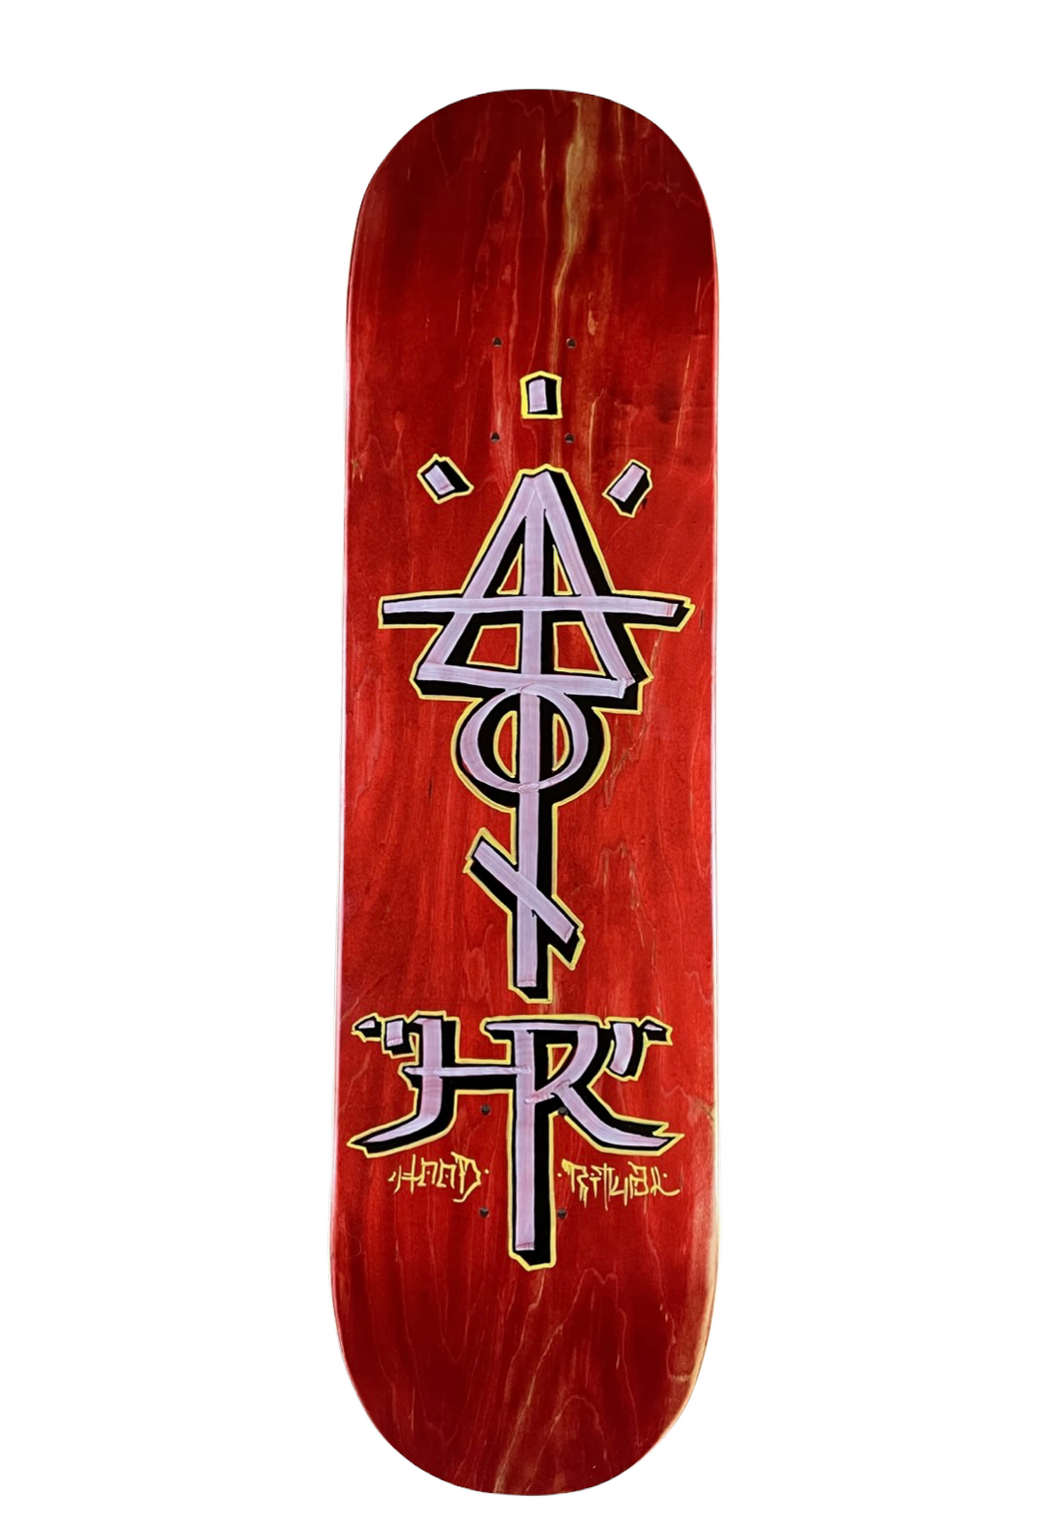 PRIMARY COLORS GRAFFITI DECKS-FIRE SIGN RED